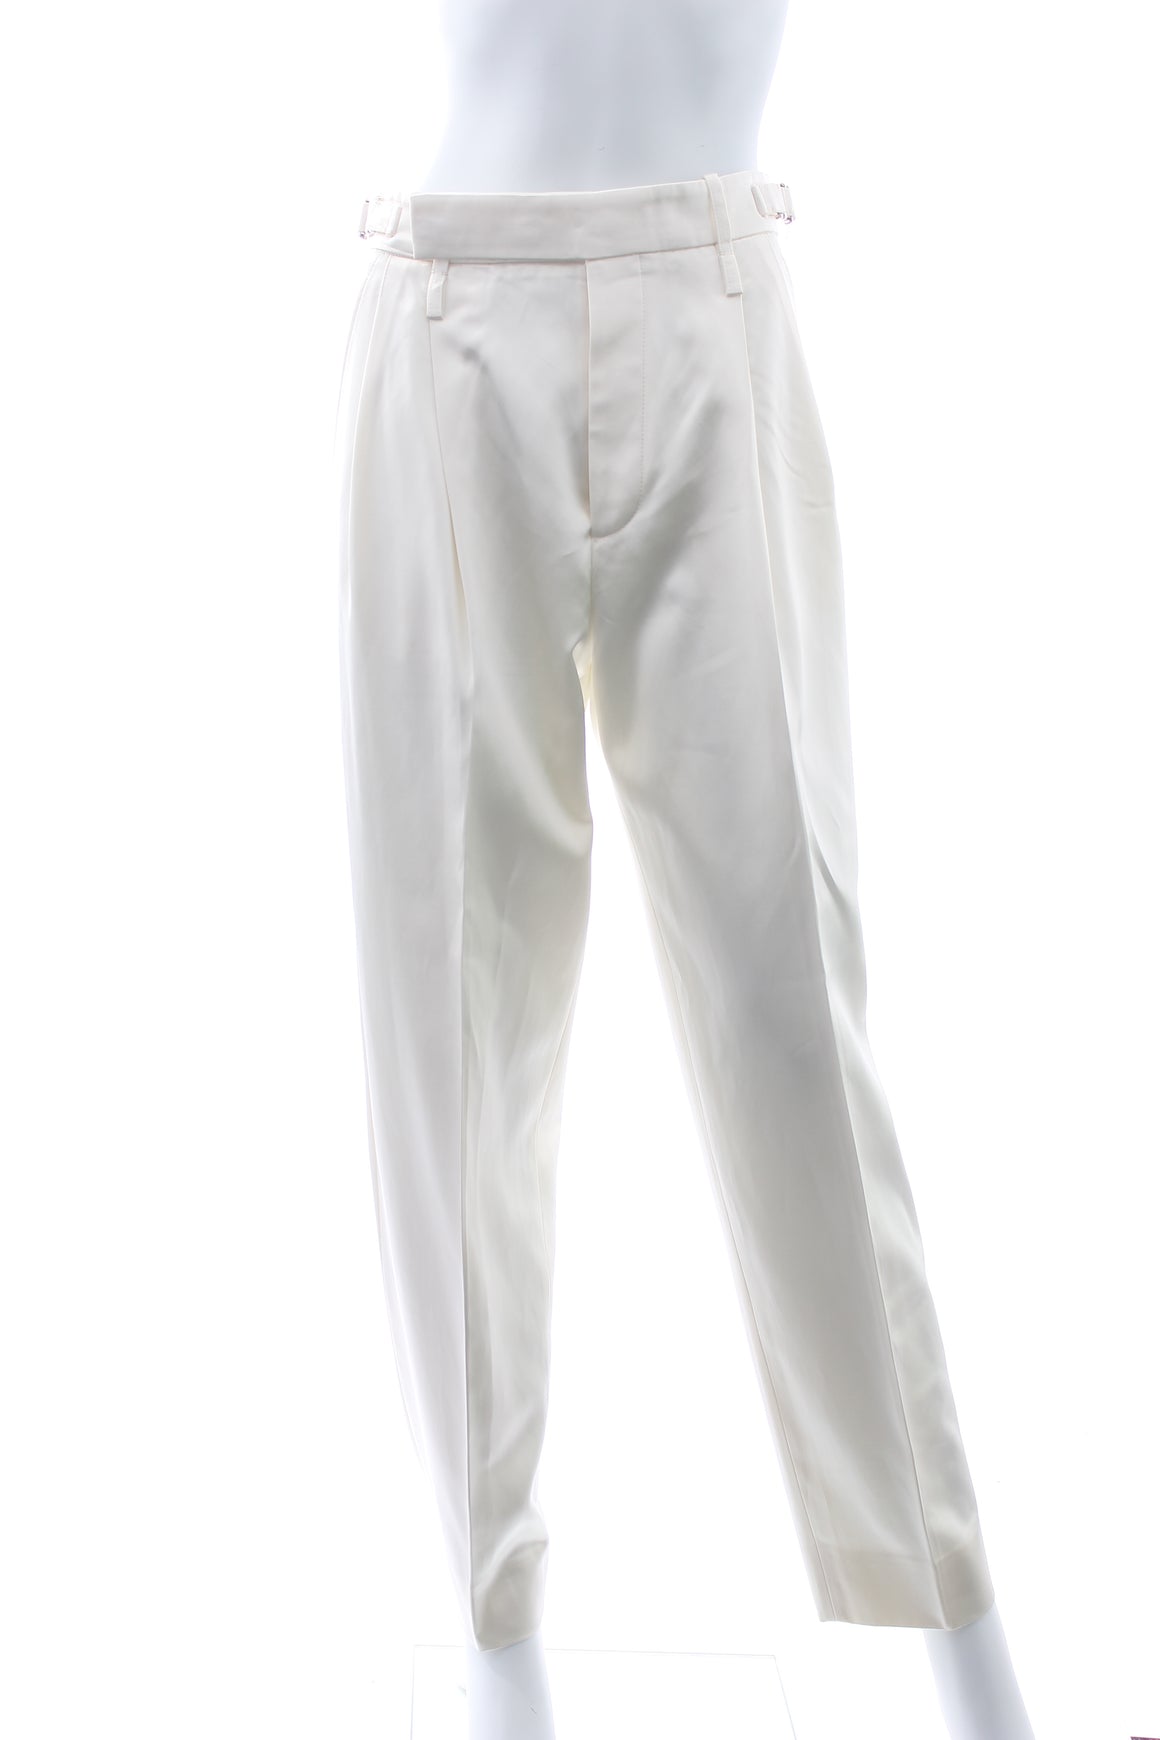 Gucci Self-tie Belted Satin Trousers